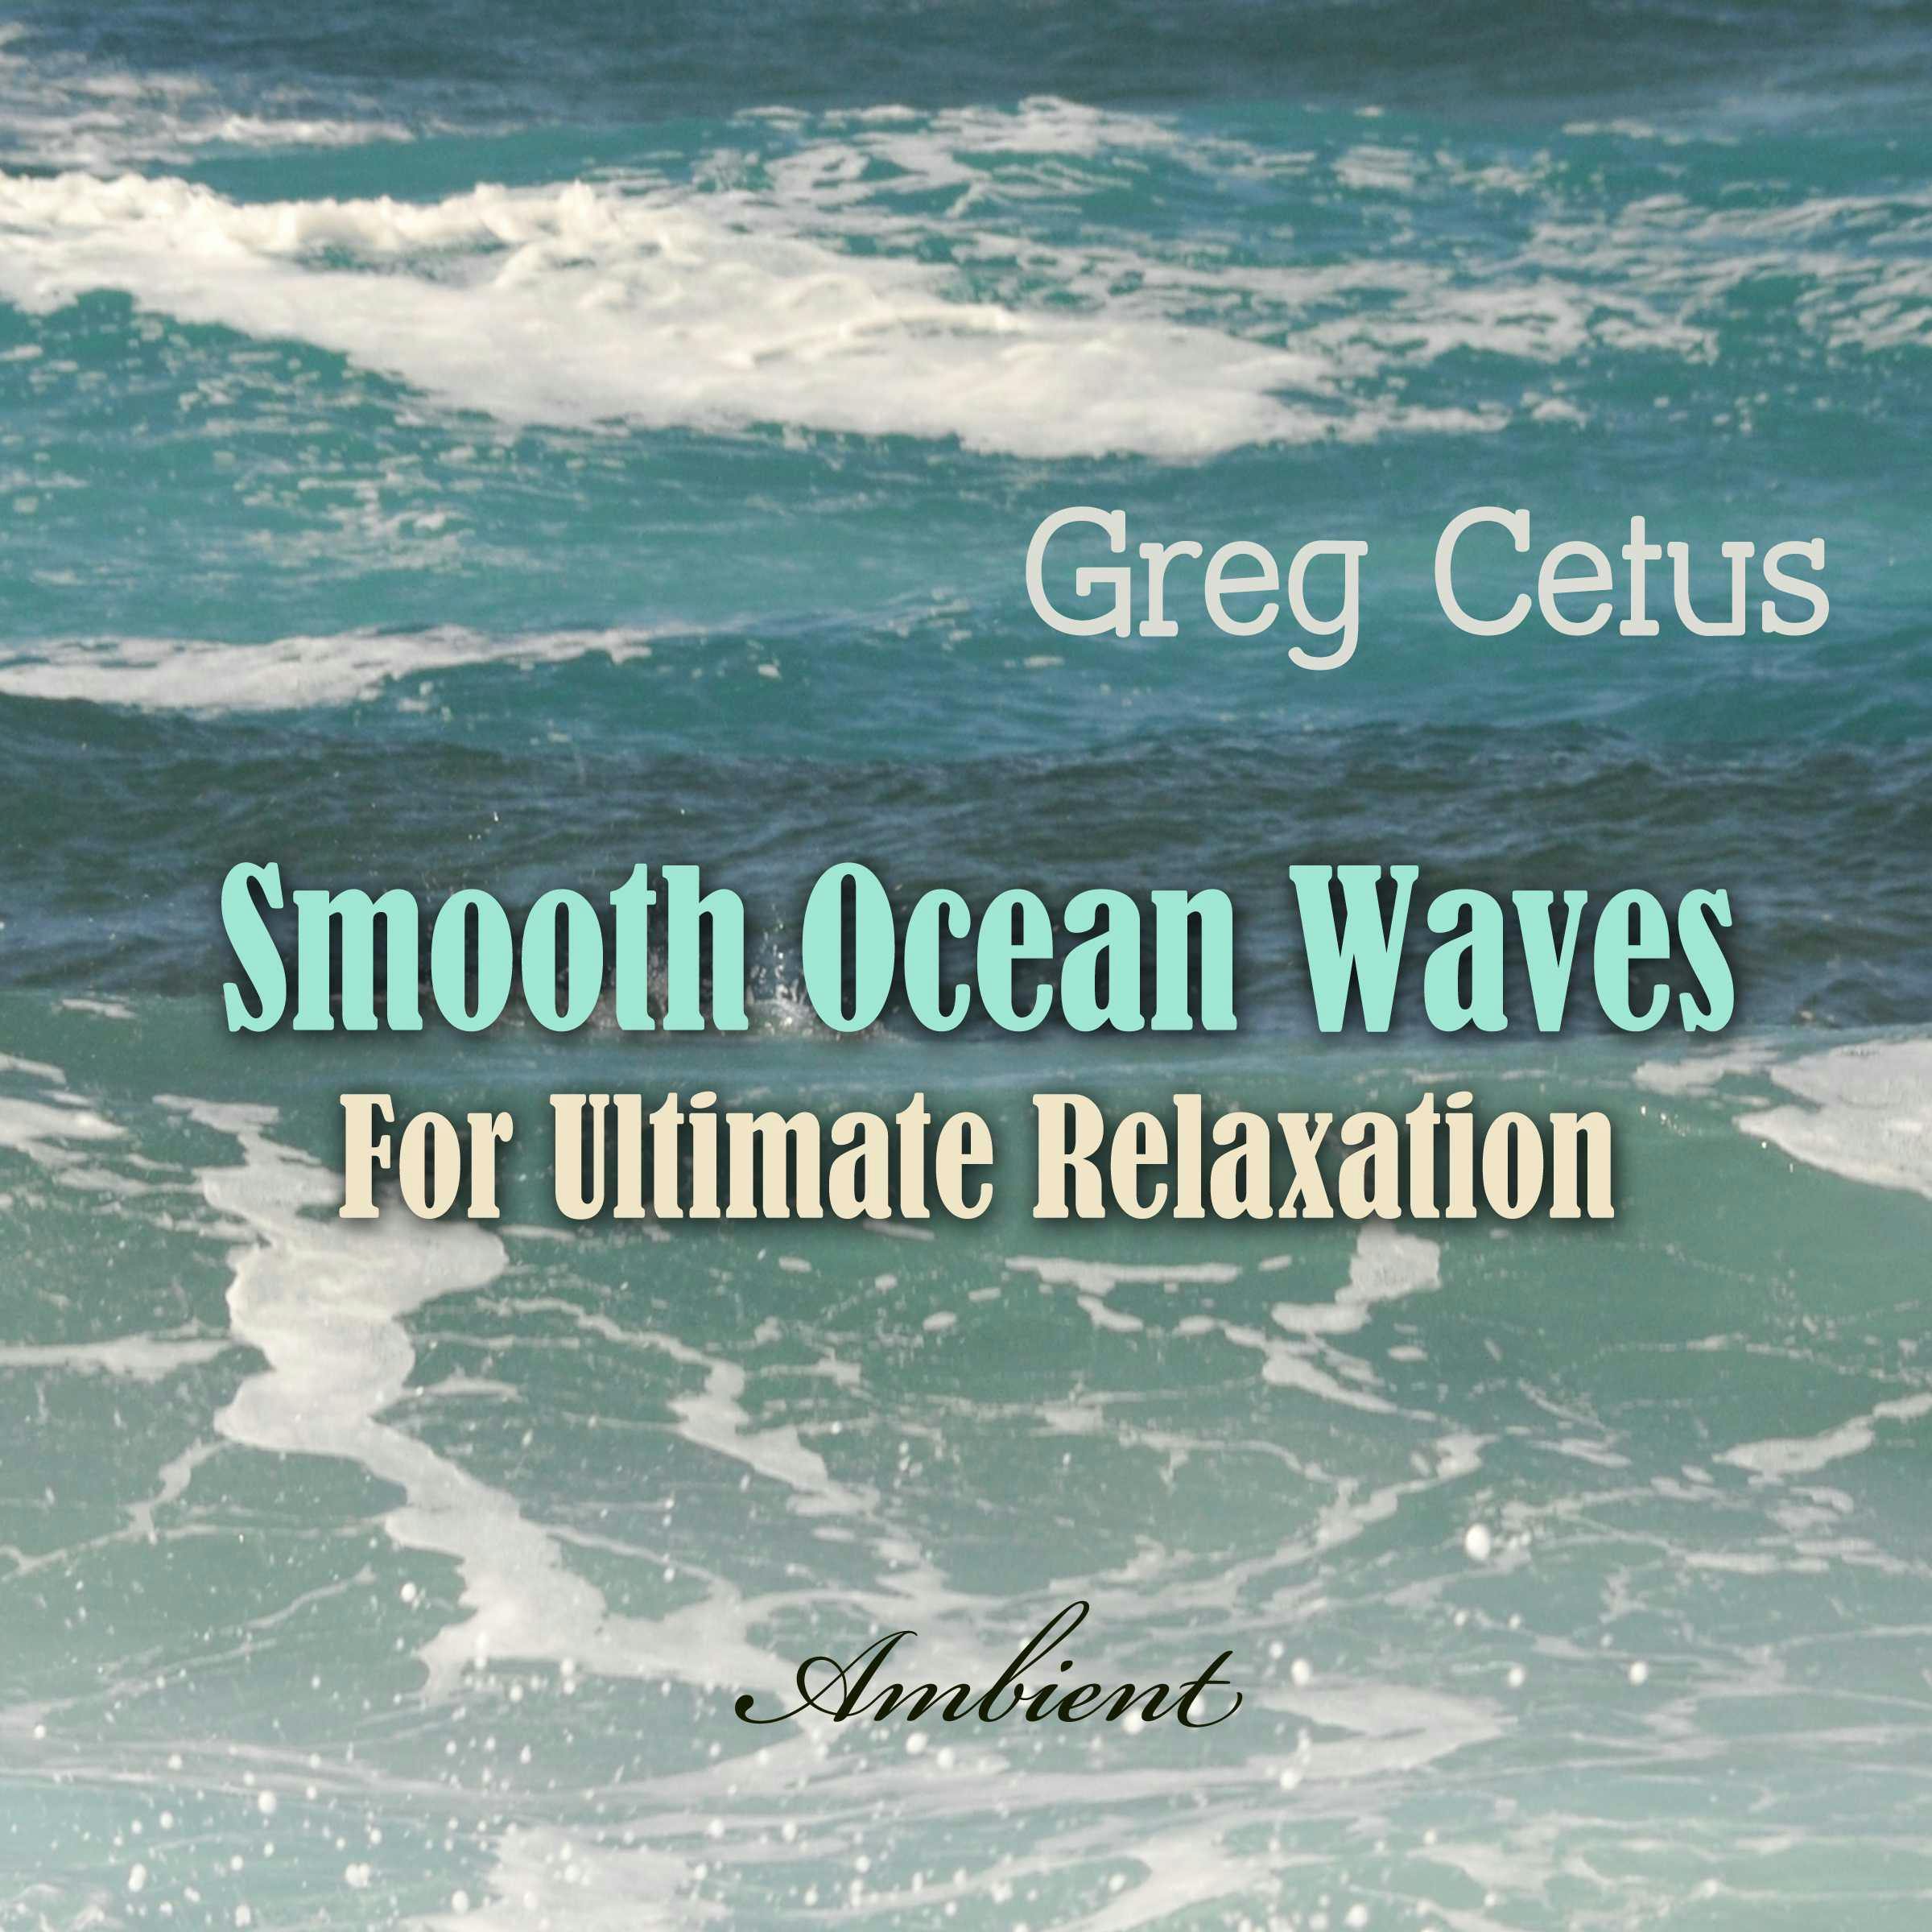 Smooth Ocean Waves: For Ultimate Relaxation - Greg Cetus